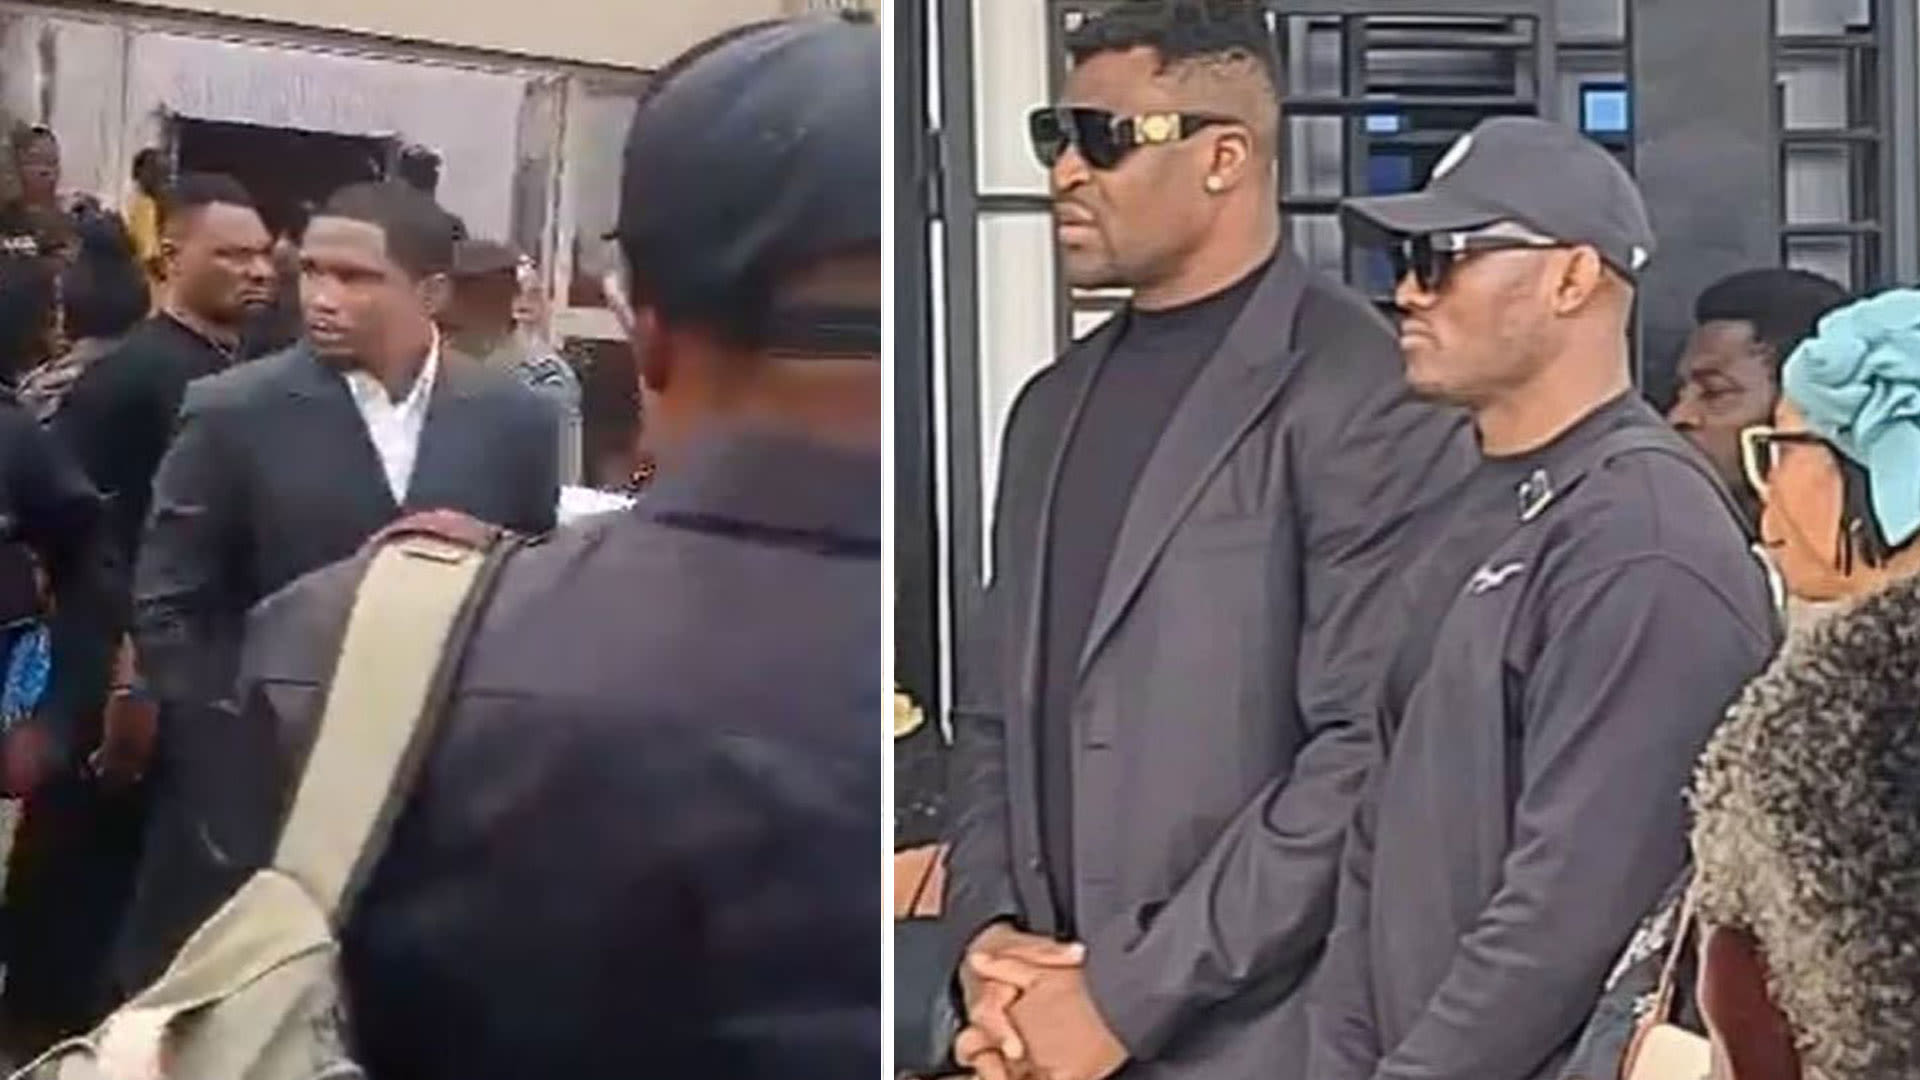 Francis Ngannou lays tragic 15-month-old son to rest at funeral